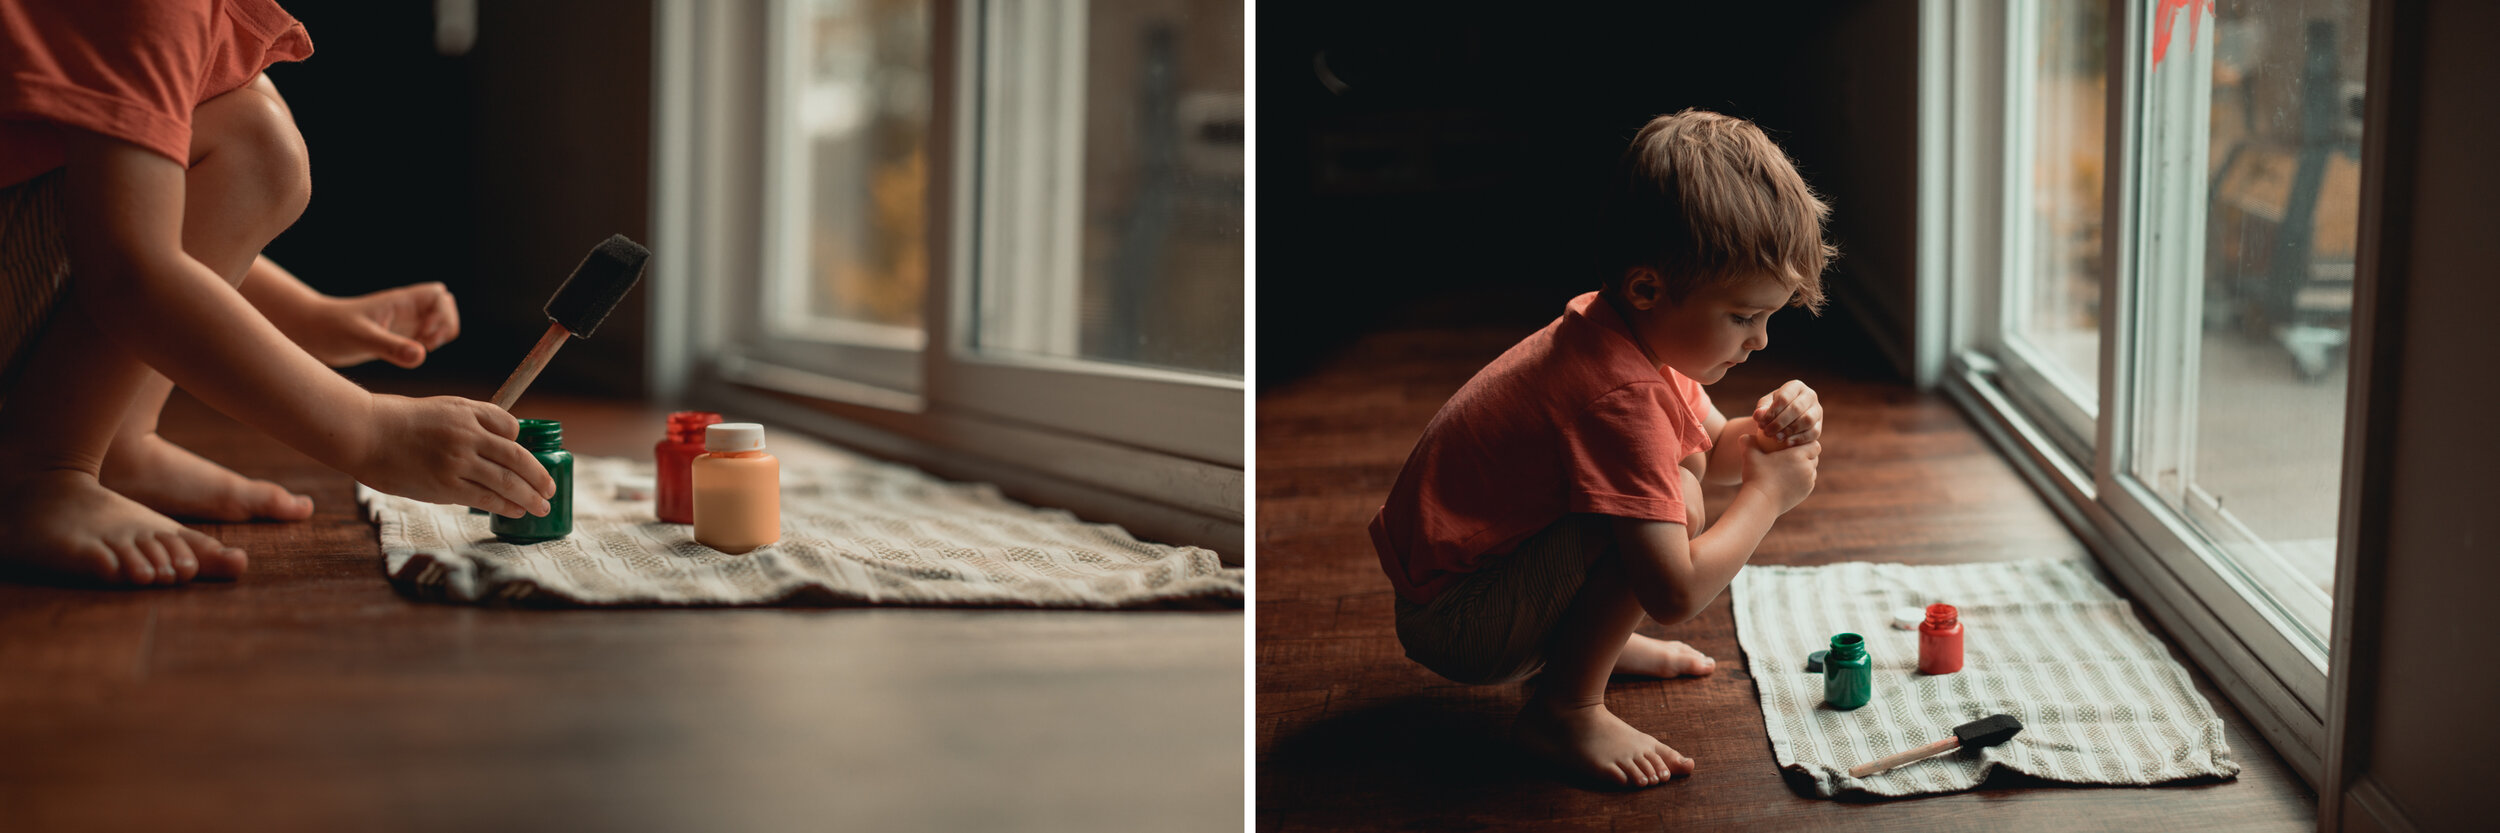 diptych of boy painting